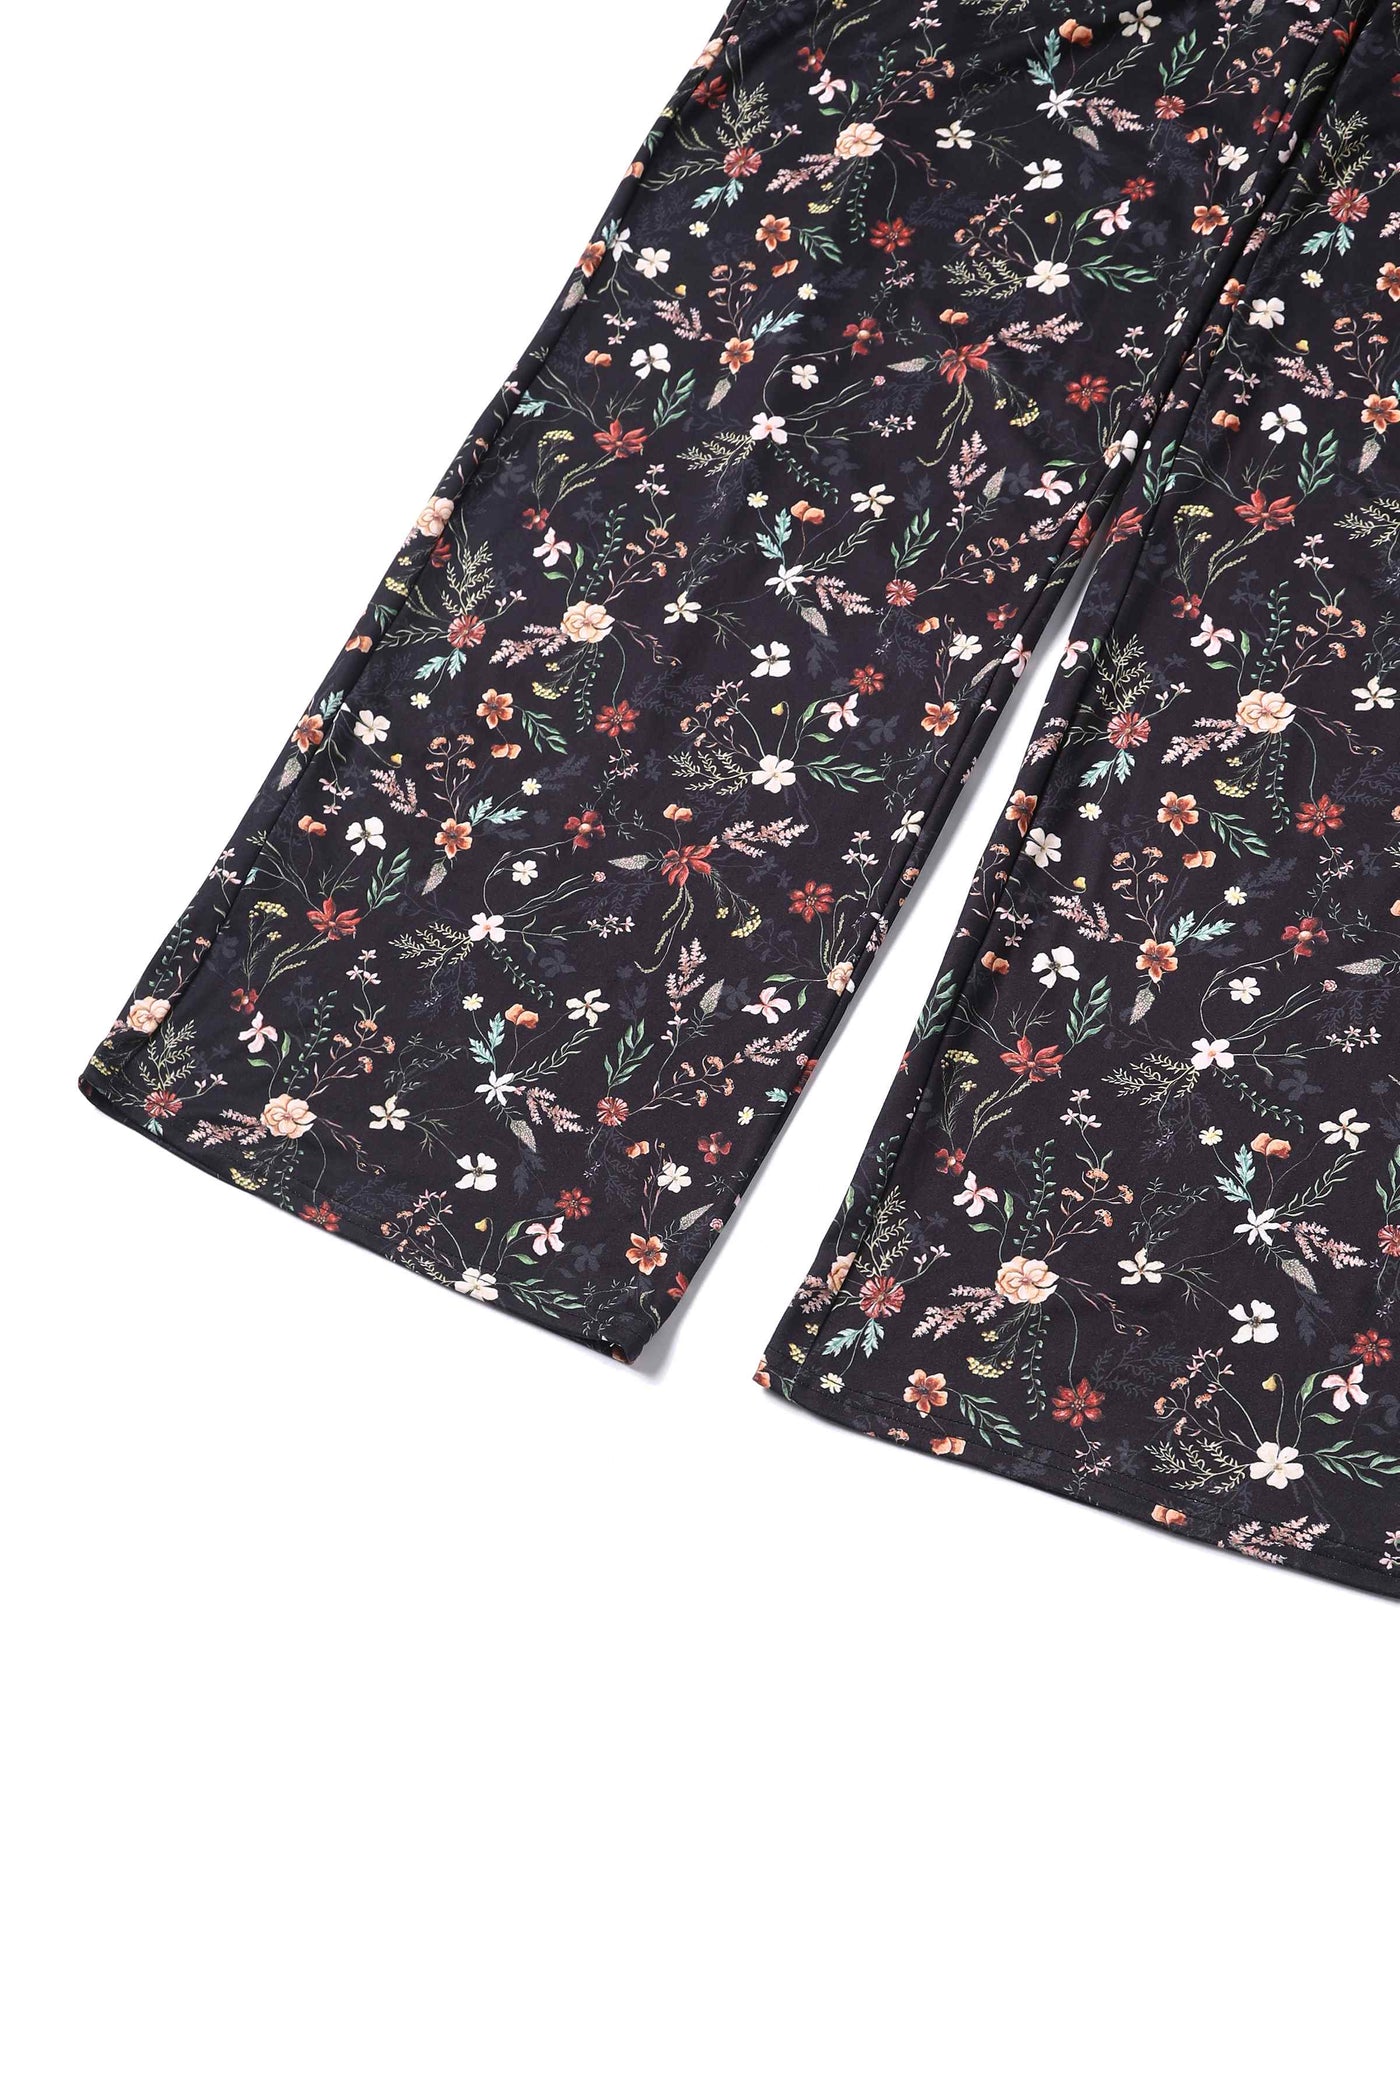 Close up View of Black Meadow Floral Short Sleeved Jumpsuit